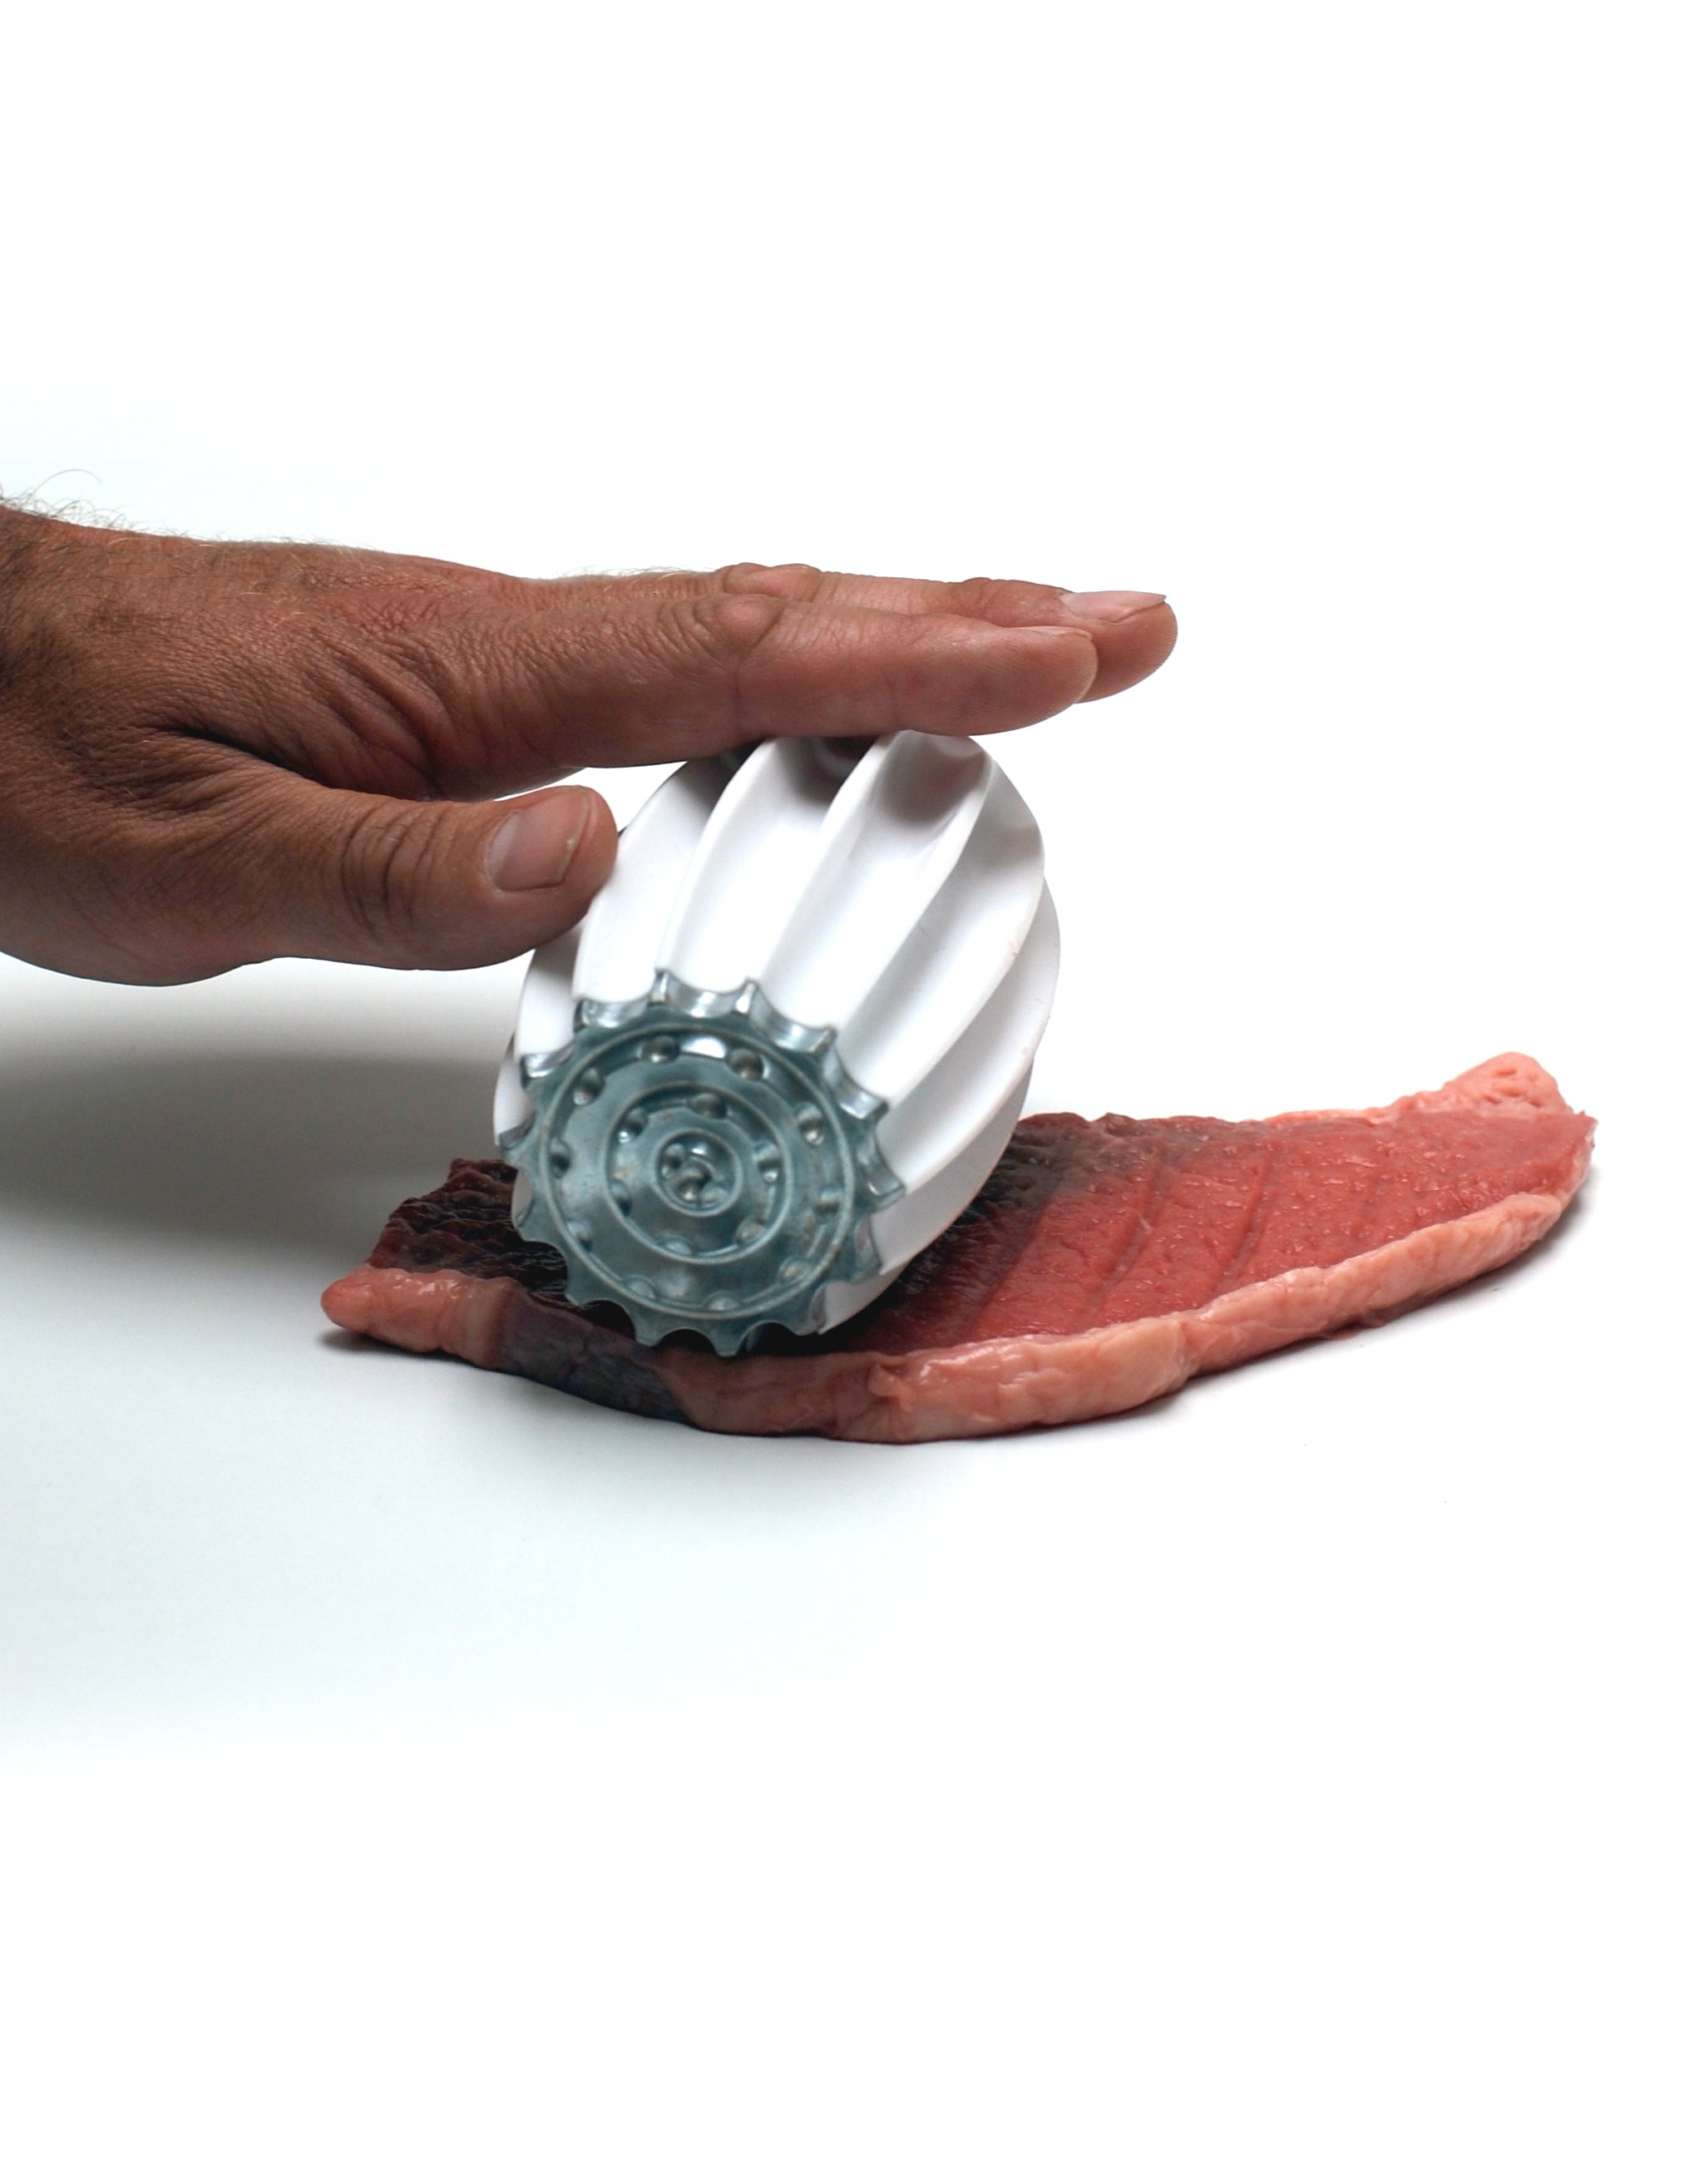 Tender - A New Kind of Meat Hammer - Exciting Kitchen Gadgets and Utensils  from Üutensil.